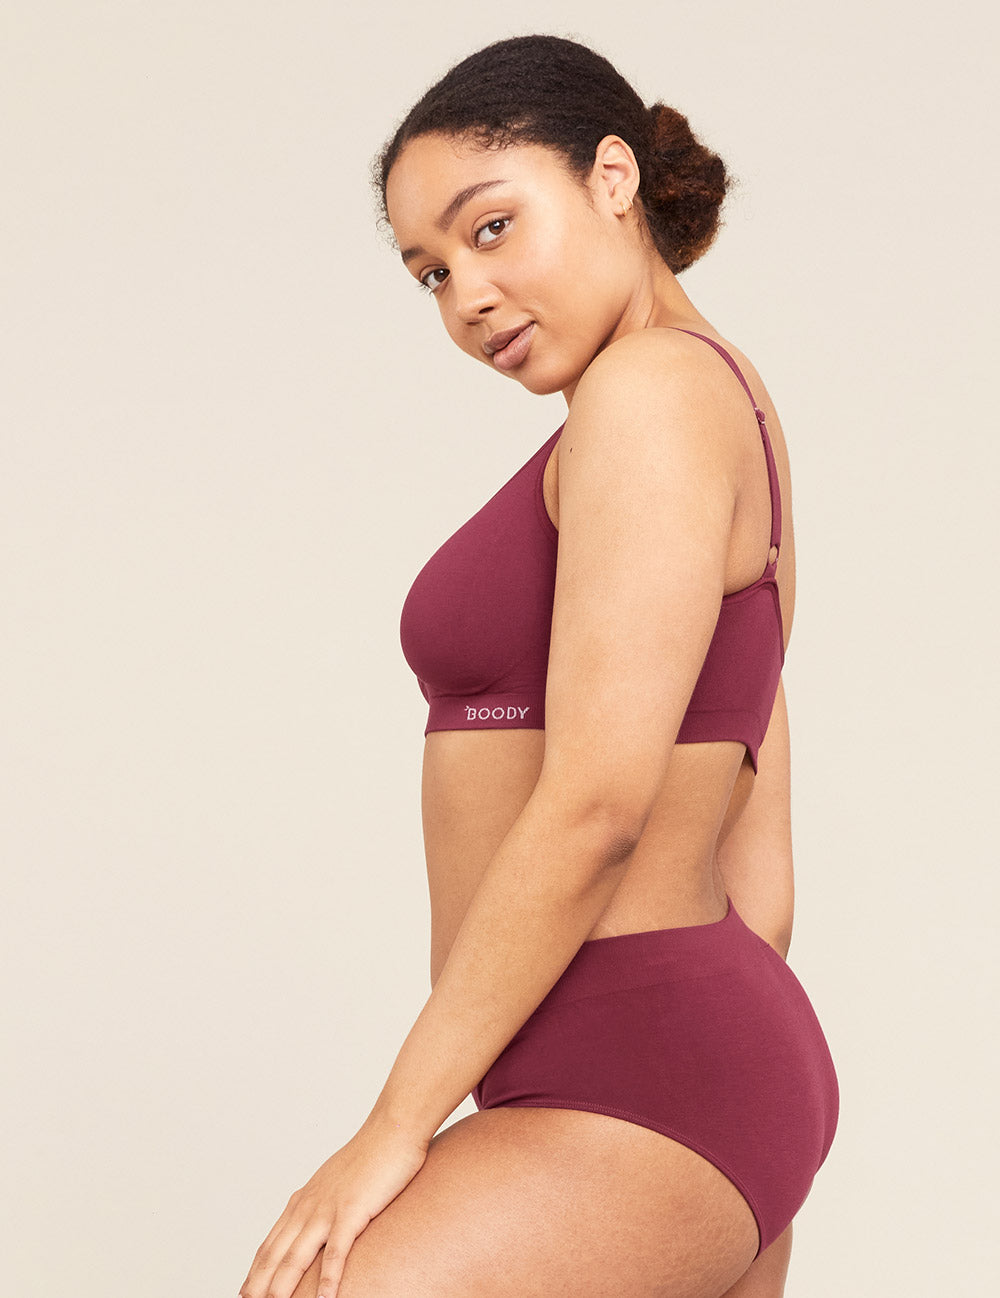 Boody® on Instagram: Our Full Bust Wireless Bra is the 🐐 @cloud.sways # boody #bamboounderwear #productreview #fullbustbra #braguide #fullerbust  #maternityfriendly #wirelessbra